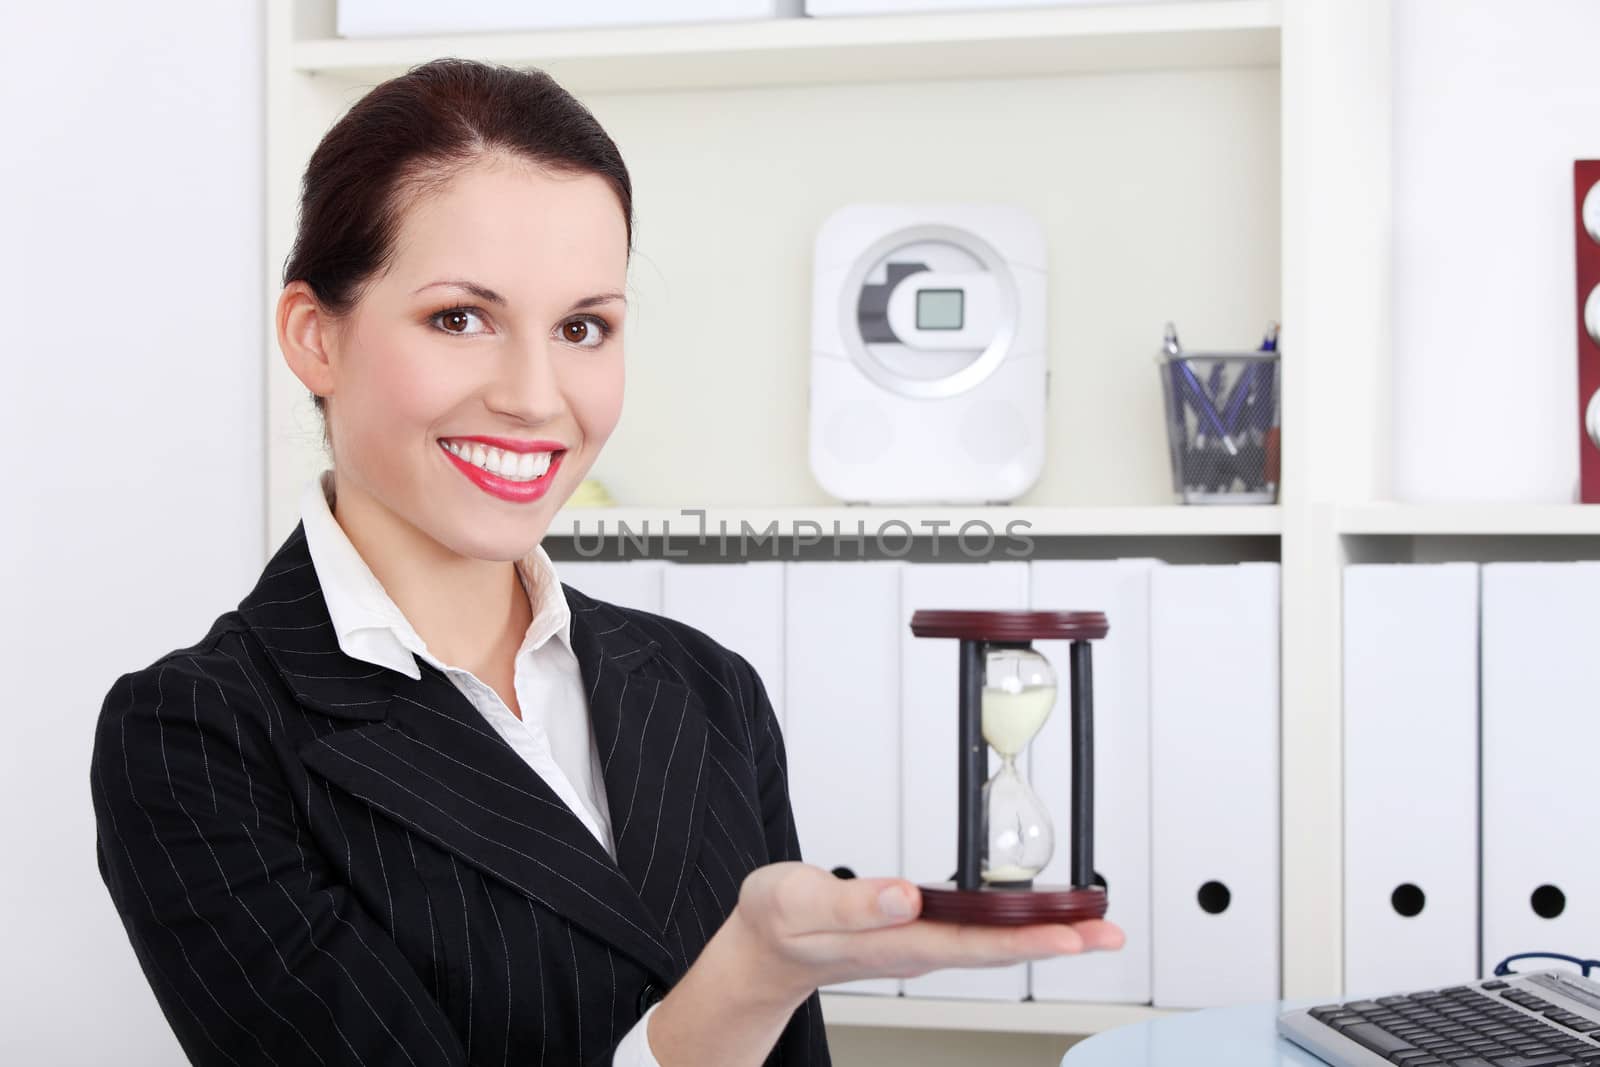 Business woman holding hourglass. Sitting in an office.